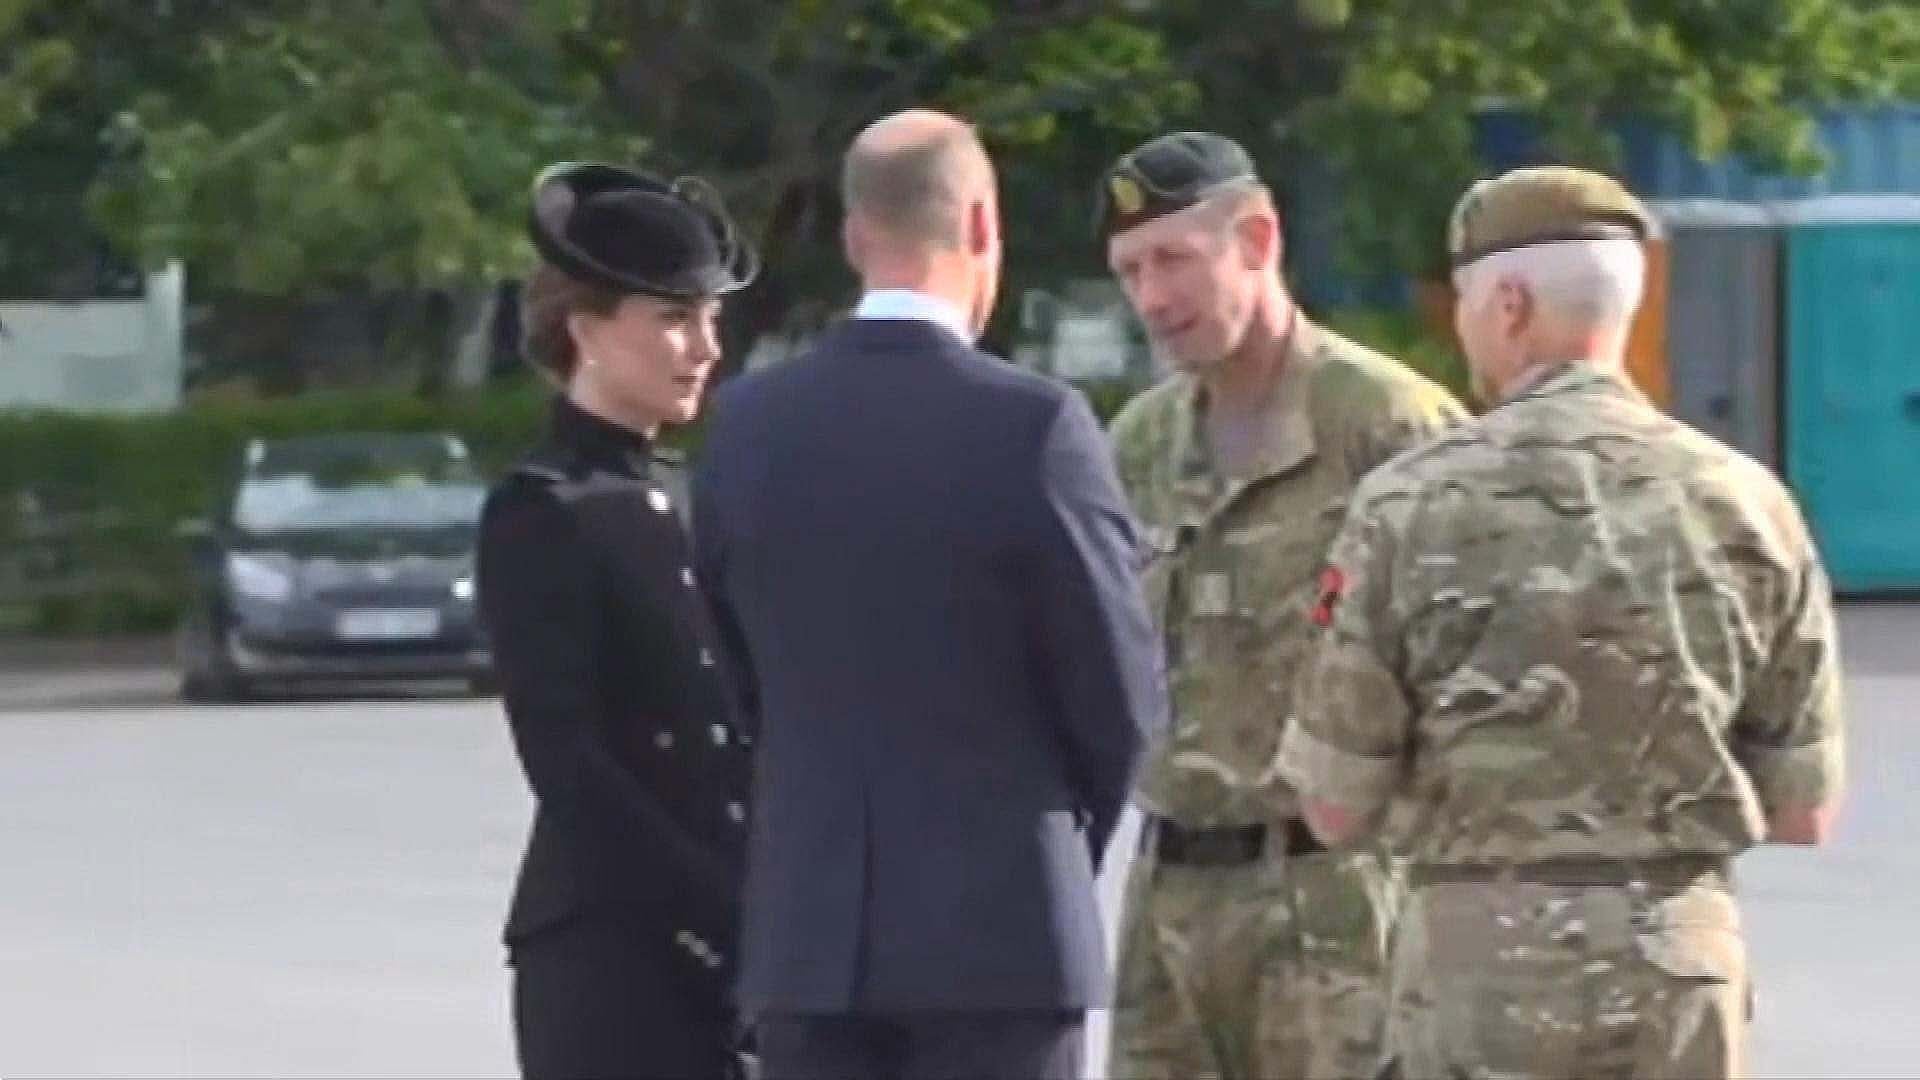 Prince William and Kate Middleton Visit Troops Participating in Queen's Funeral